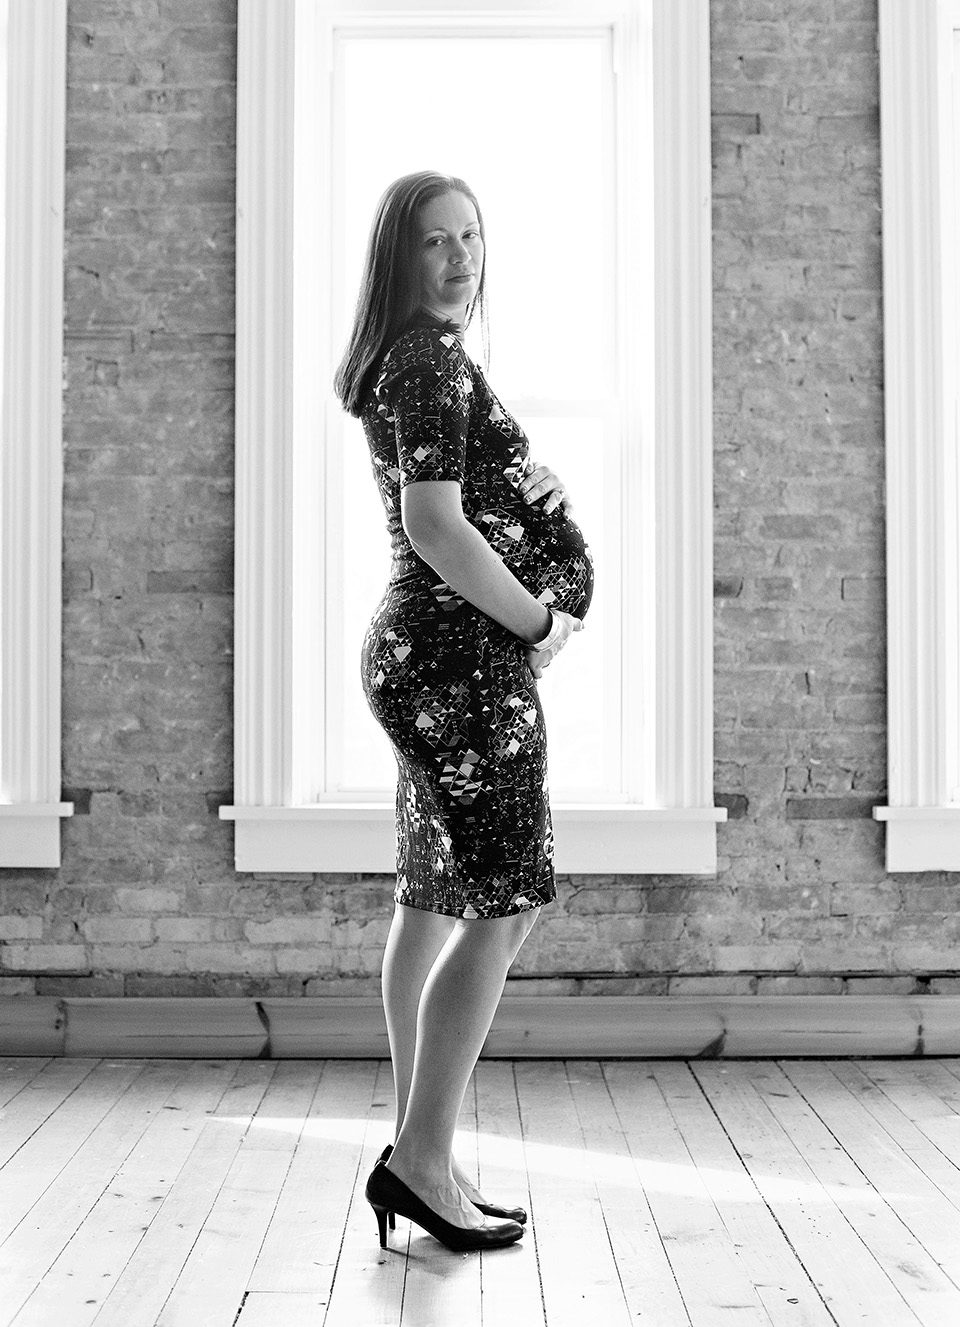 Studio maternity session, Mischief and Laughs Photography, Finger Lakes NY